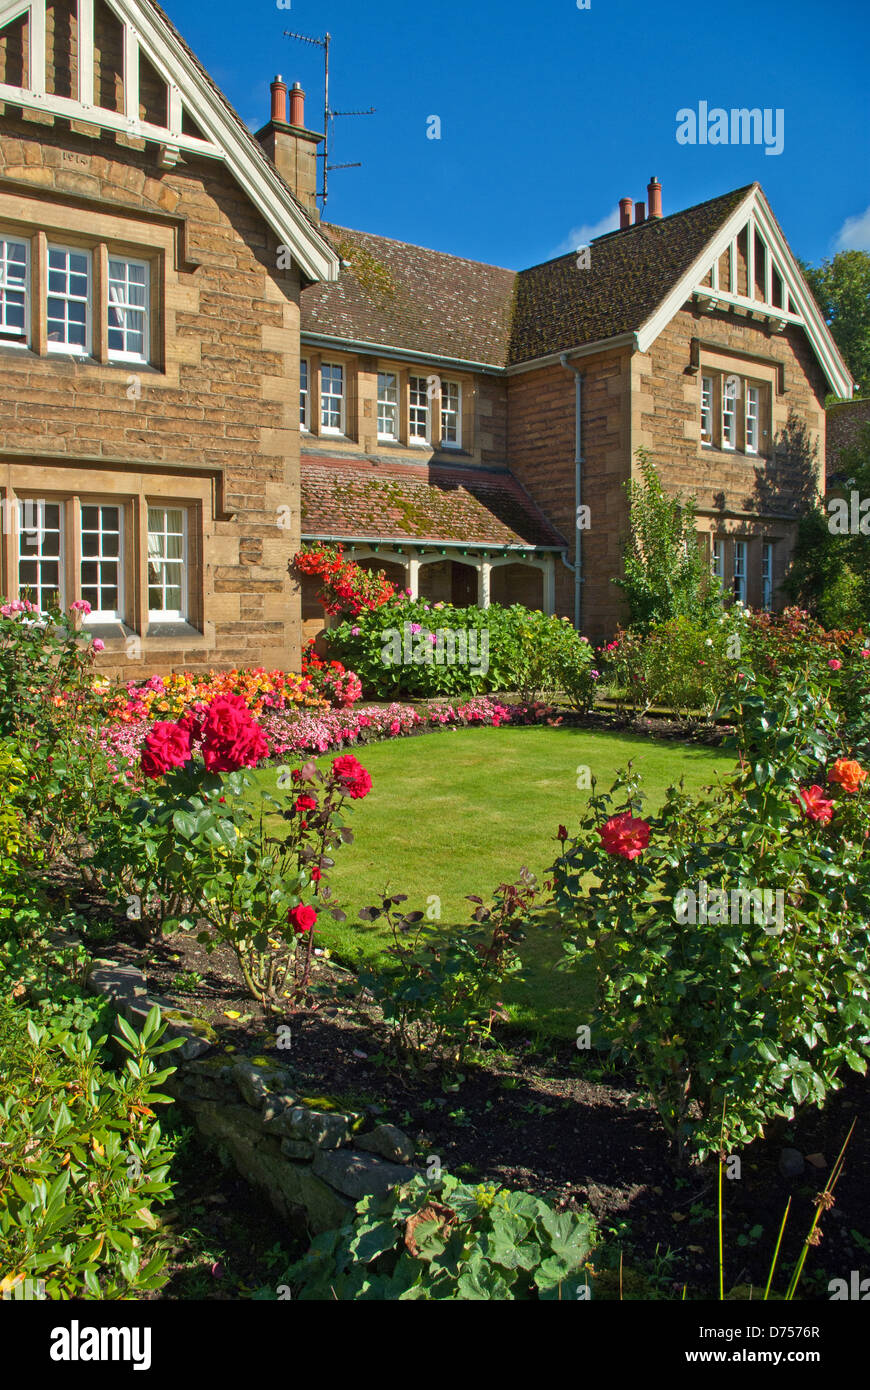 Mellow stone house in the village of Ford, with a front lawn surrounded by flowers and shrubs Stock Photo